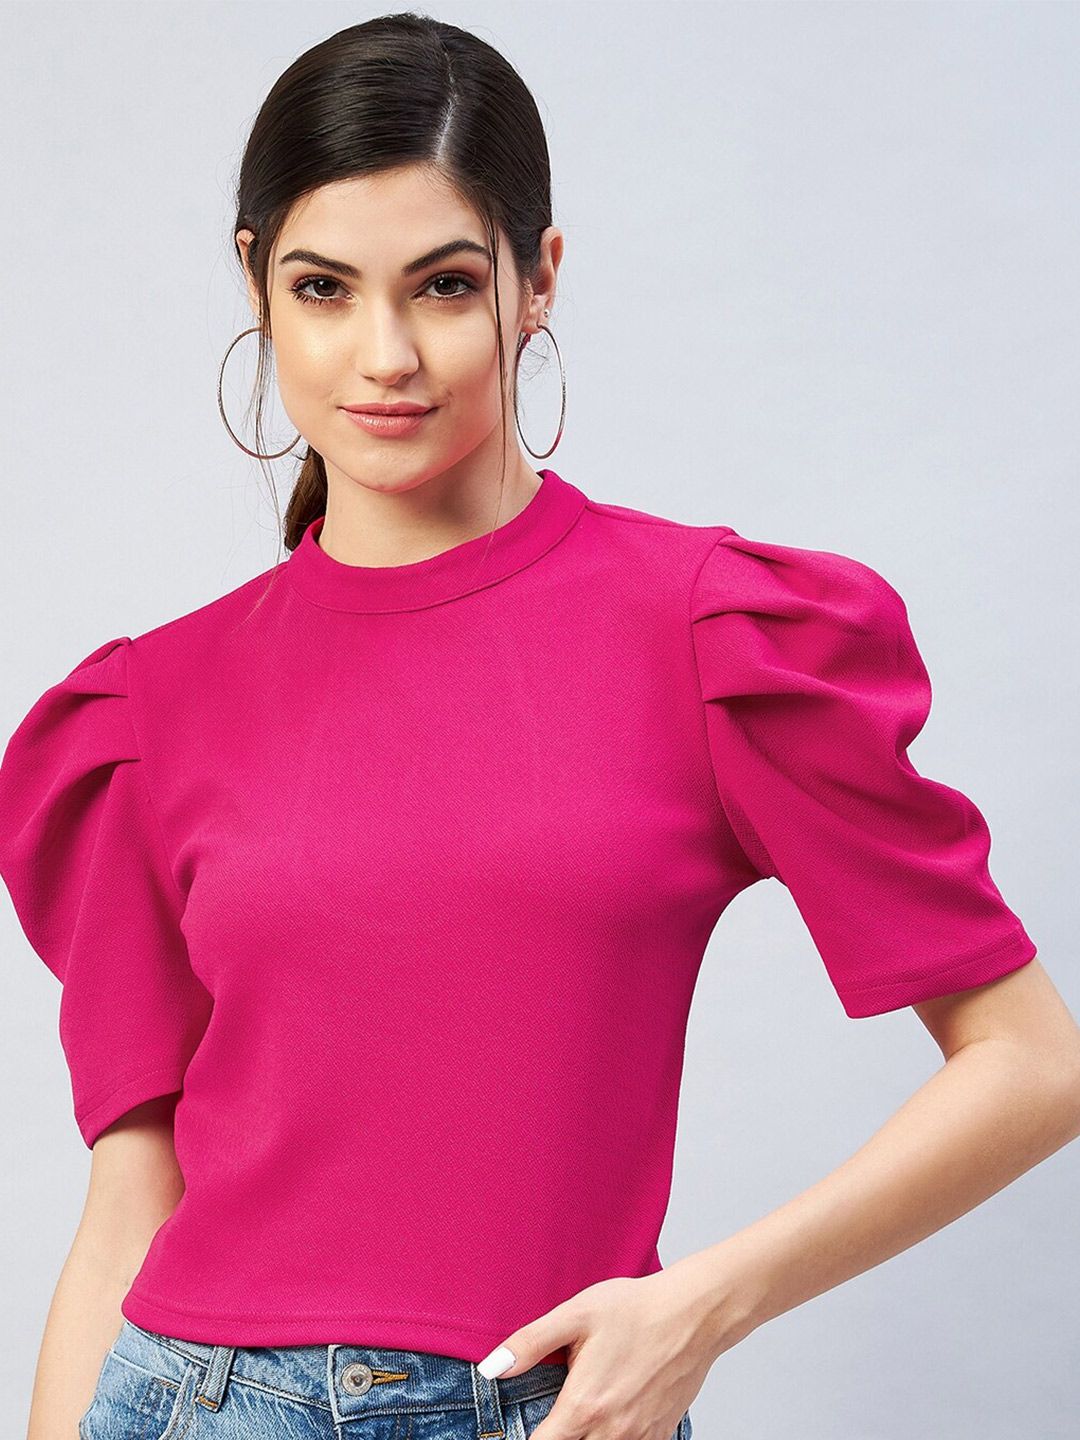 Marie Claire Pink Styled Back Crop Top Price in India